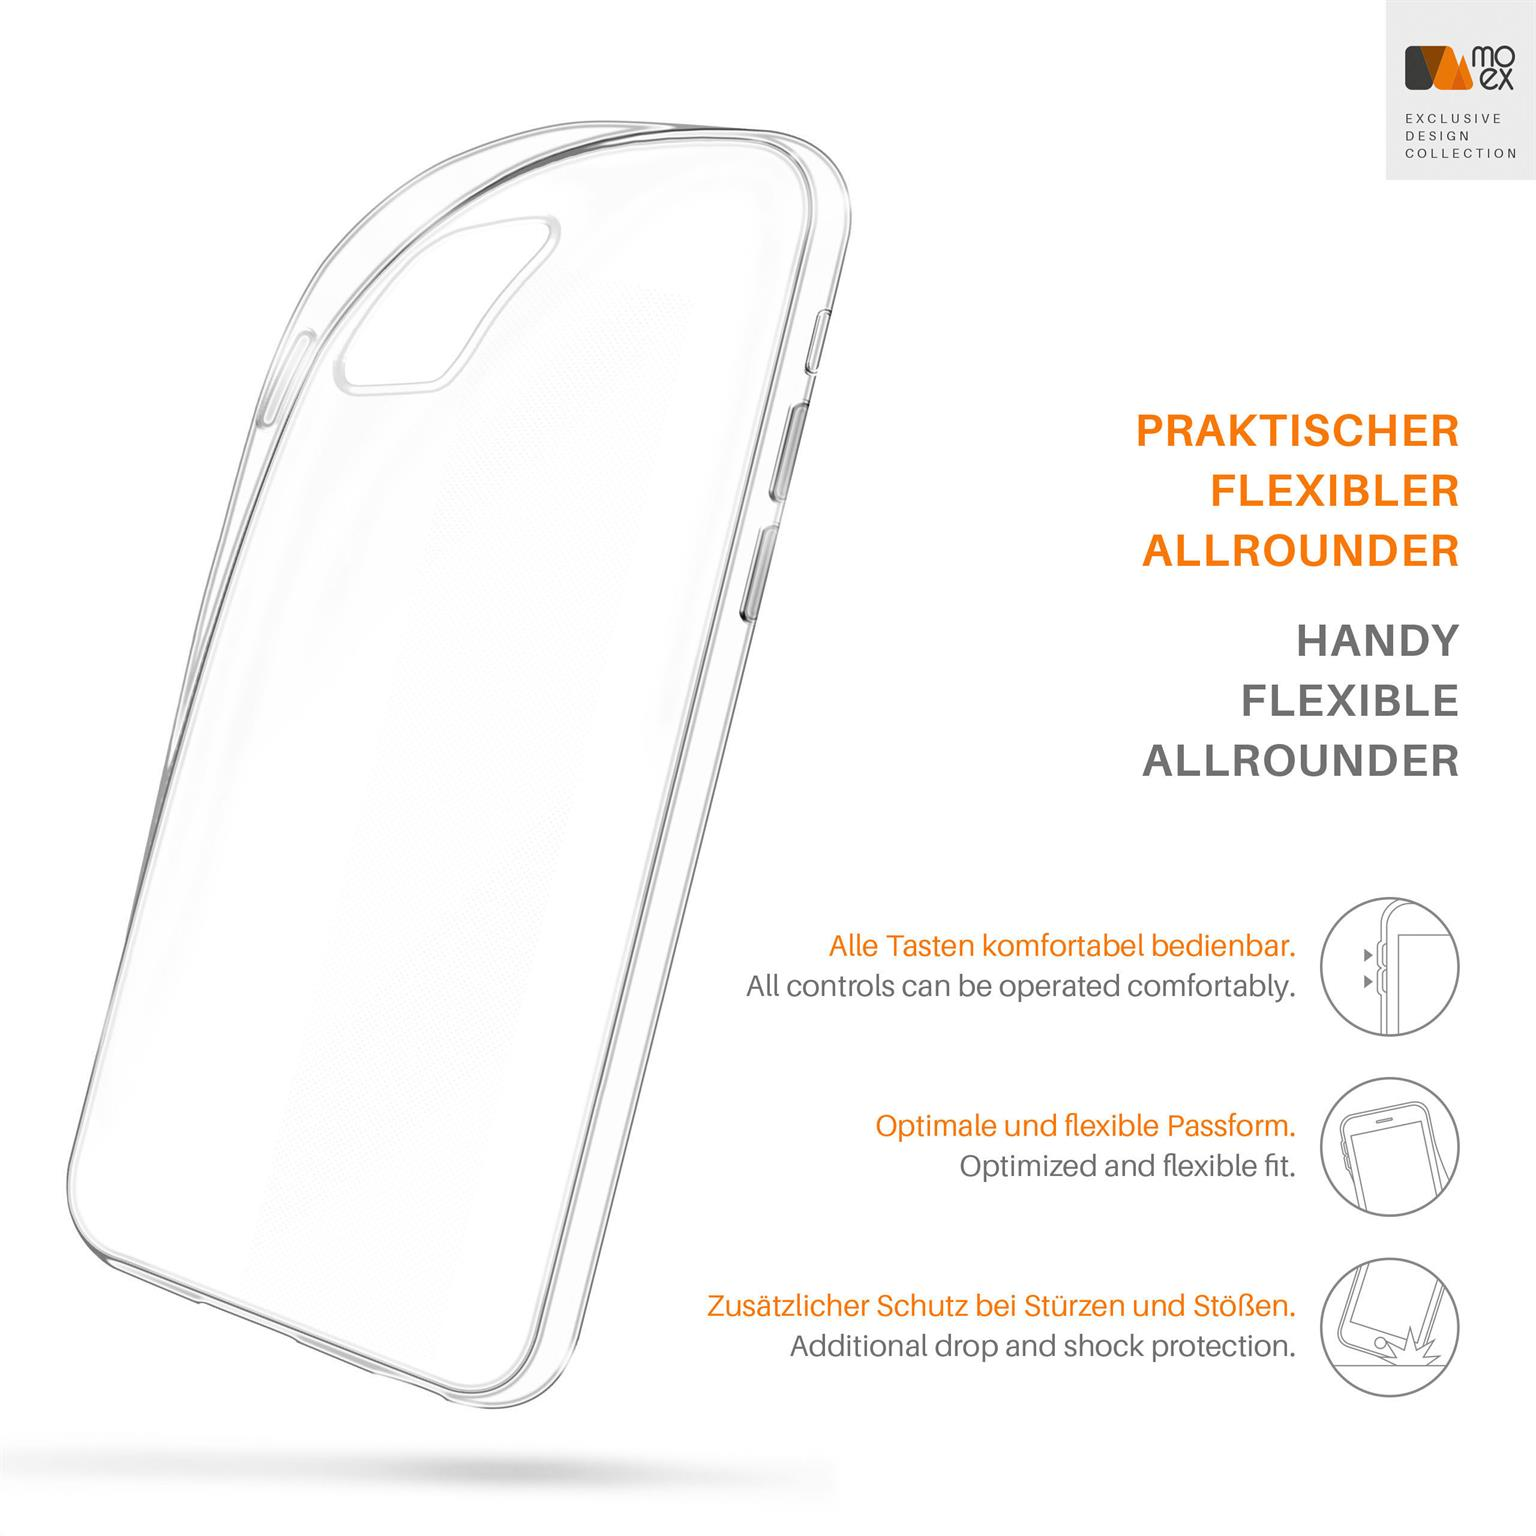 Backcover, iPhone MOEX Crystal-Clear Apple, Aero 11 Case, Pro,